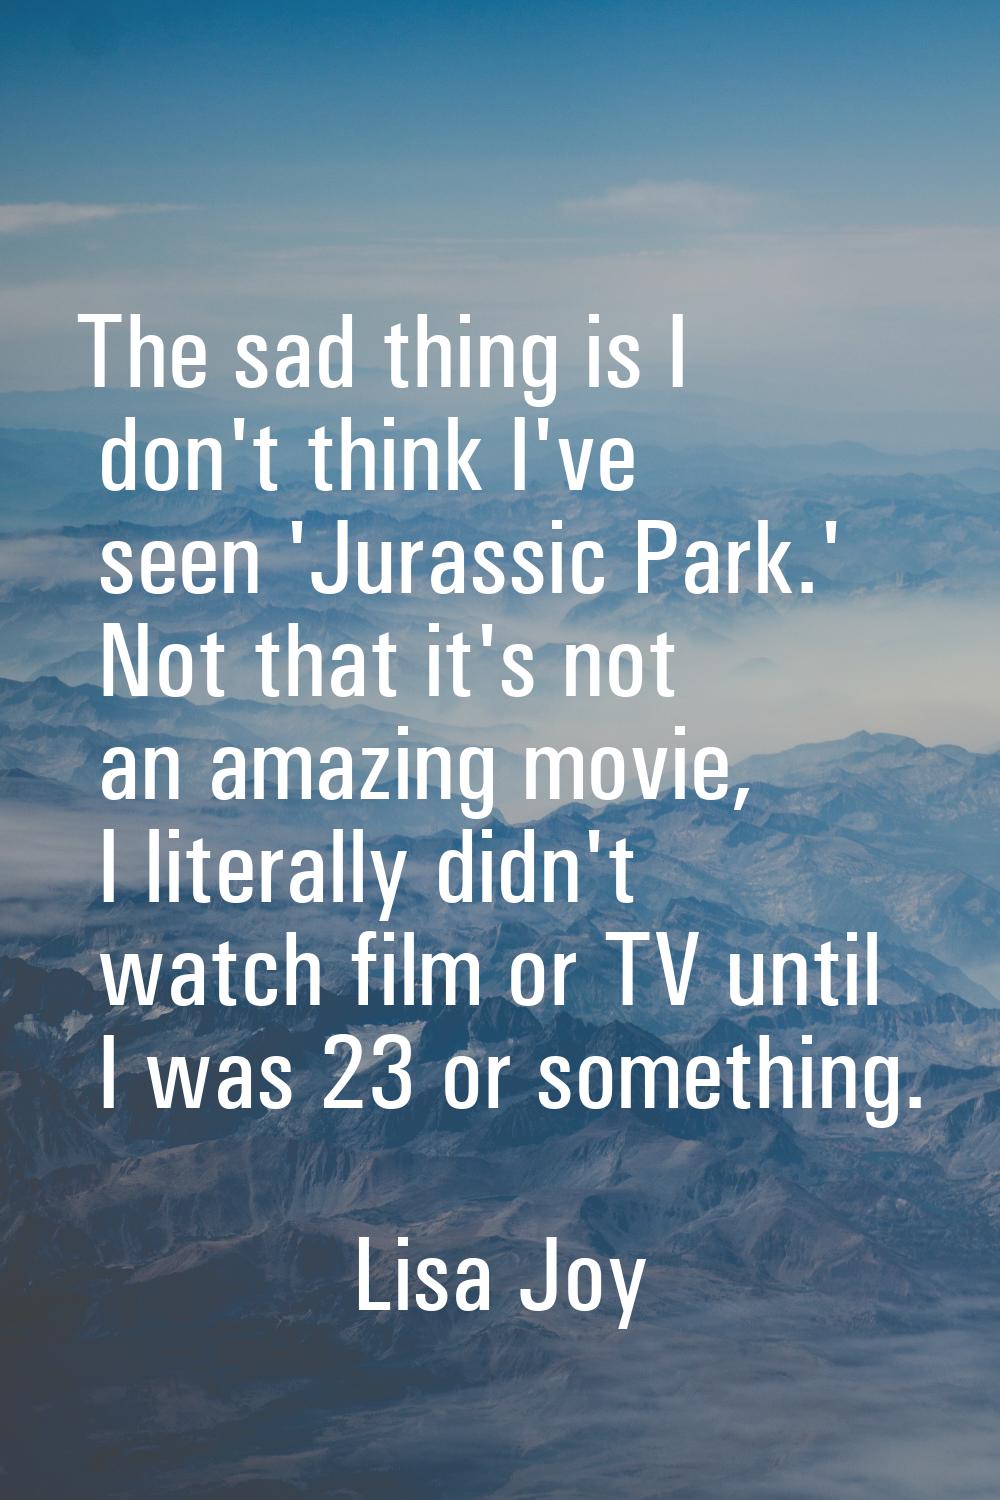 The sad thing is I don't think I've seen 'Jurassic Park.' Not that it's not an amazing movie, I lit